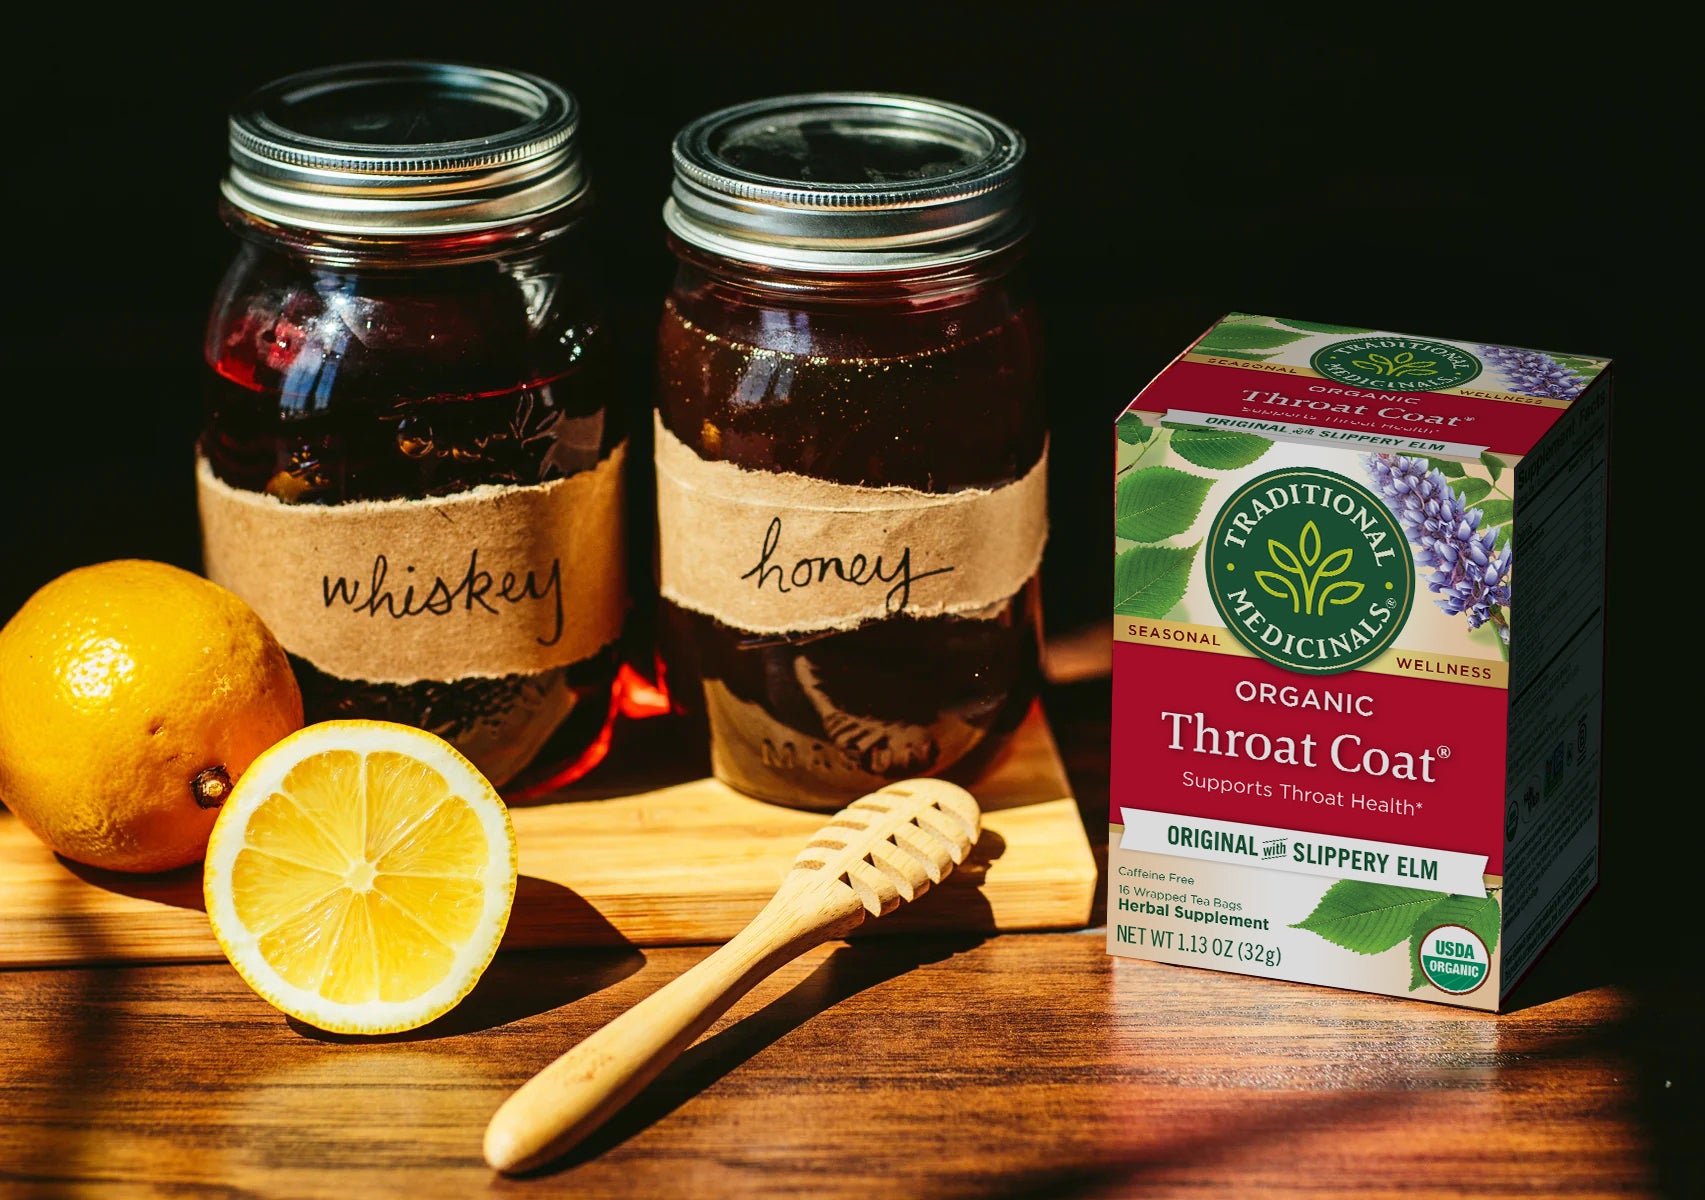 Hot Toddy ingredients with Throat Coat tea box on table